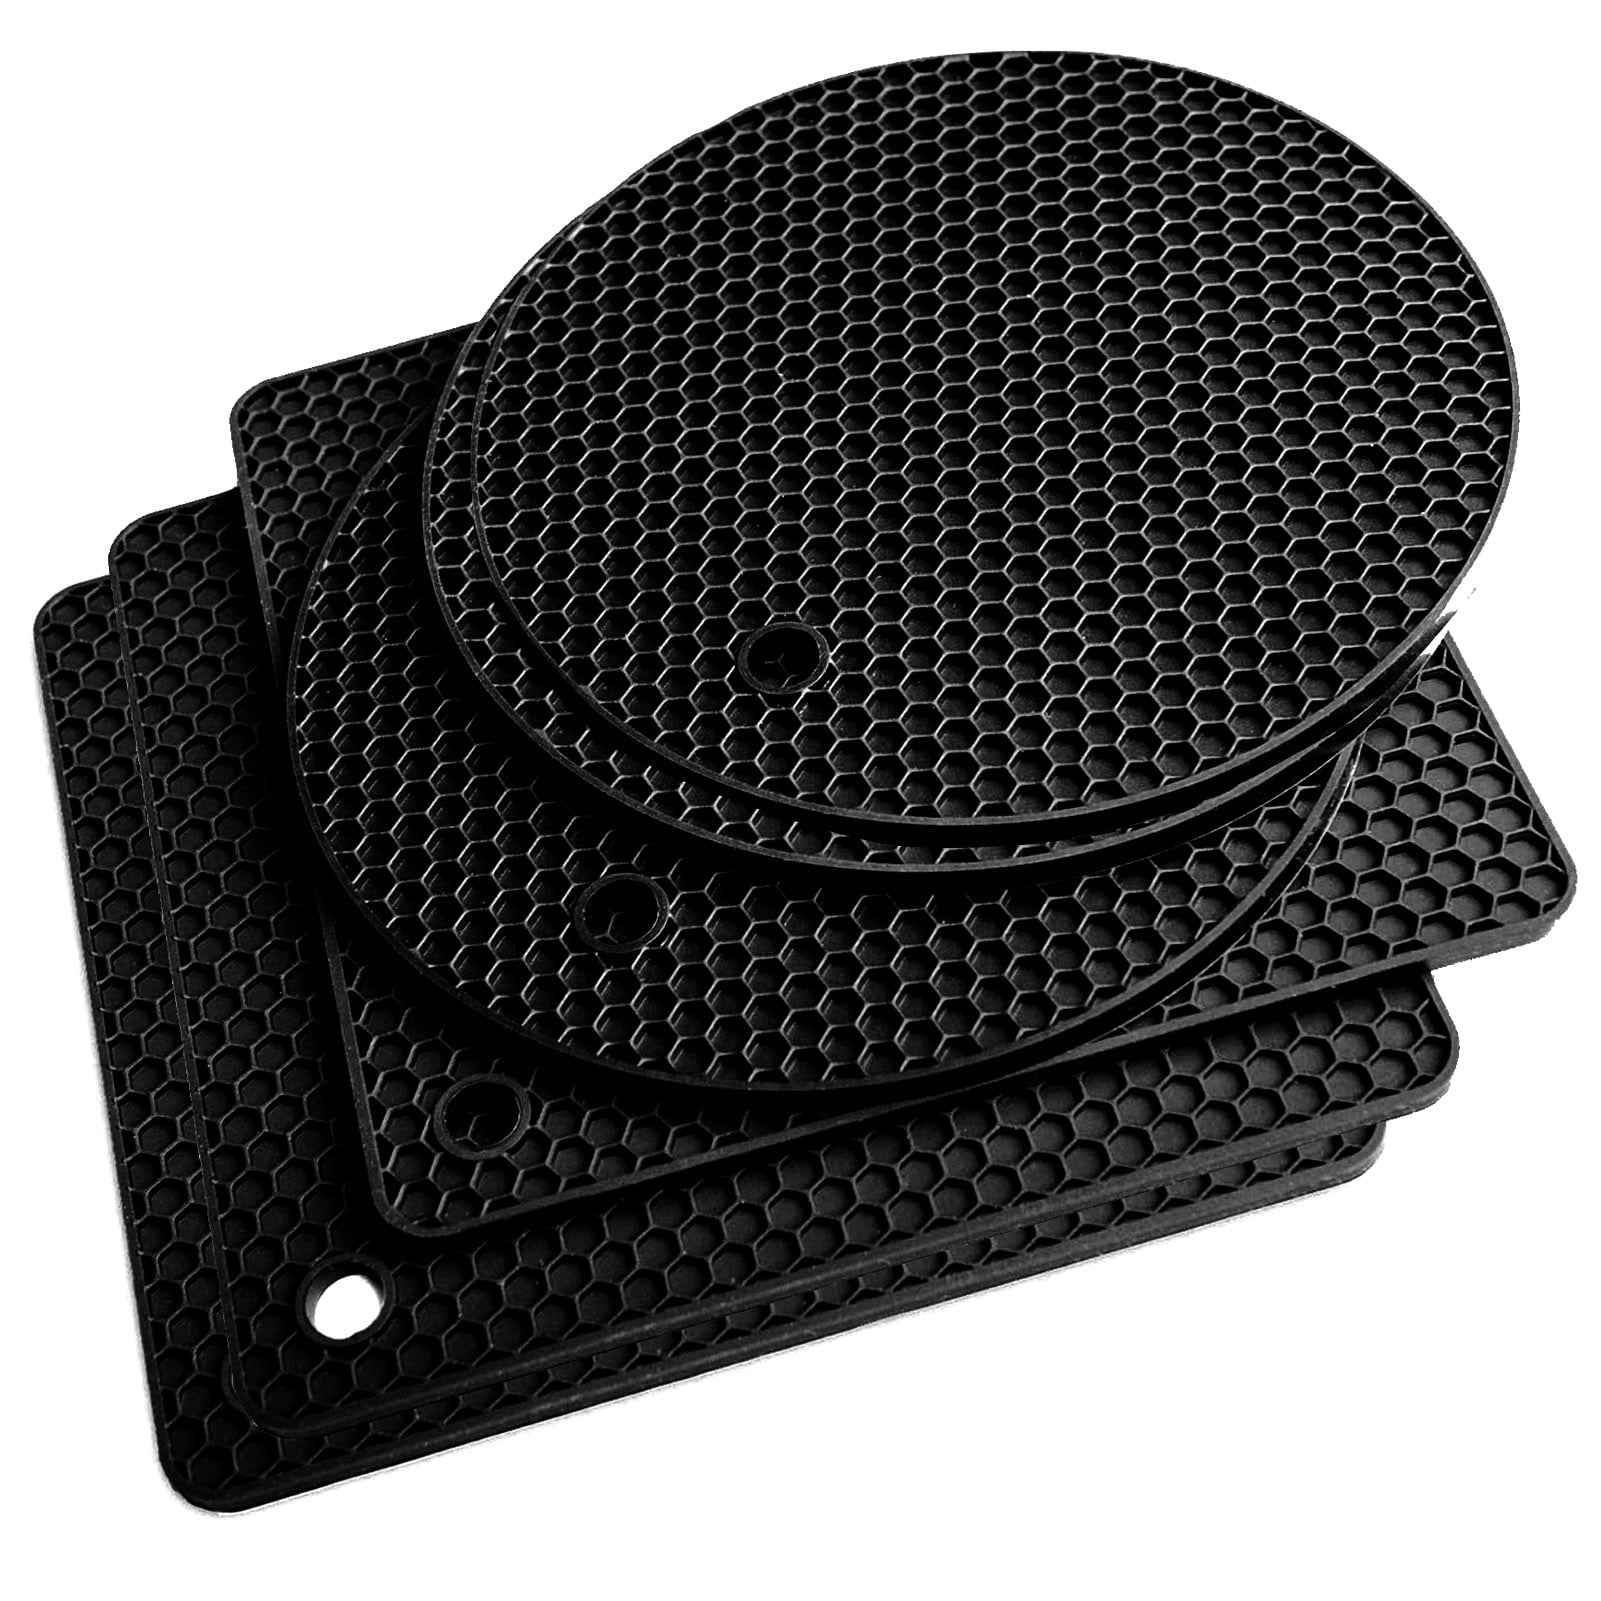 Yesbay 6Pcs Silicone Heat Resistant Honeycomb Pads Non-slip Hot Pot Holder  Drying Mats Potholders Kitchen Tools,Grey